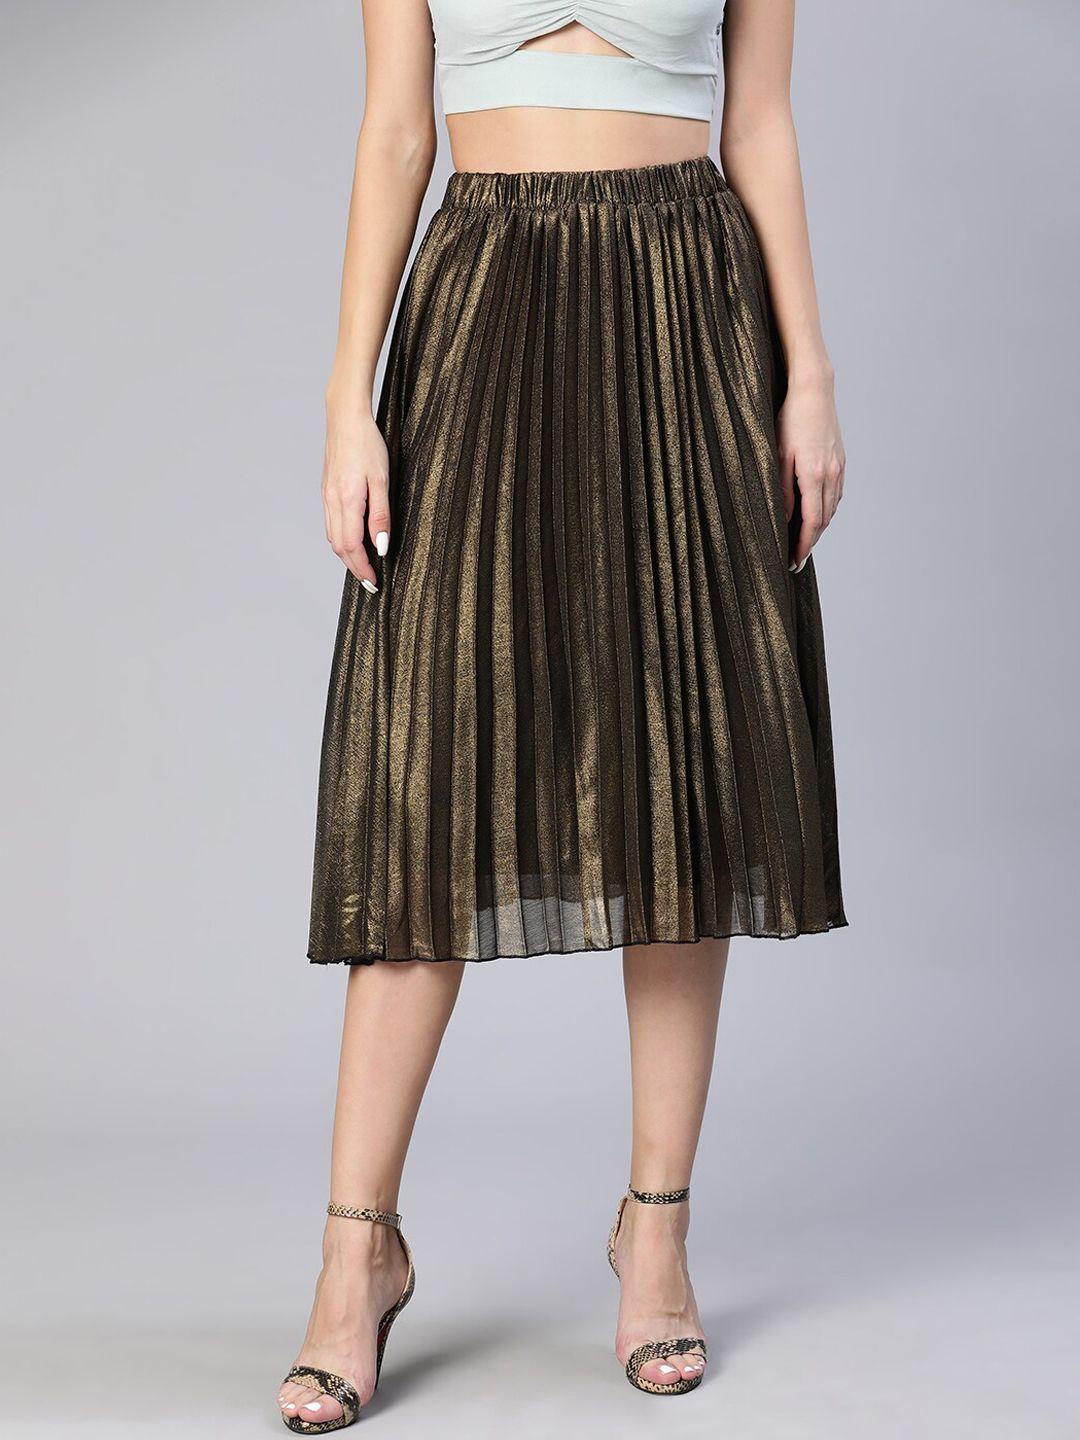 oxolloxo-accordion-pleated-a-line-skirt